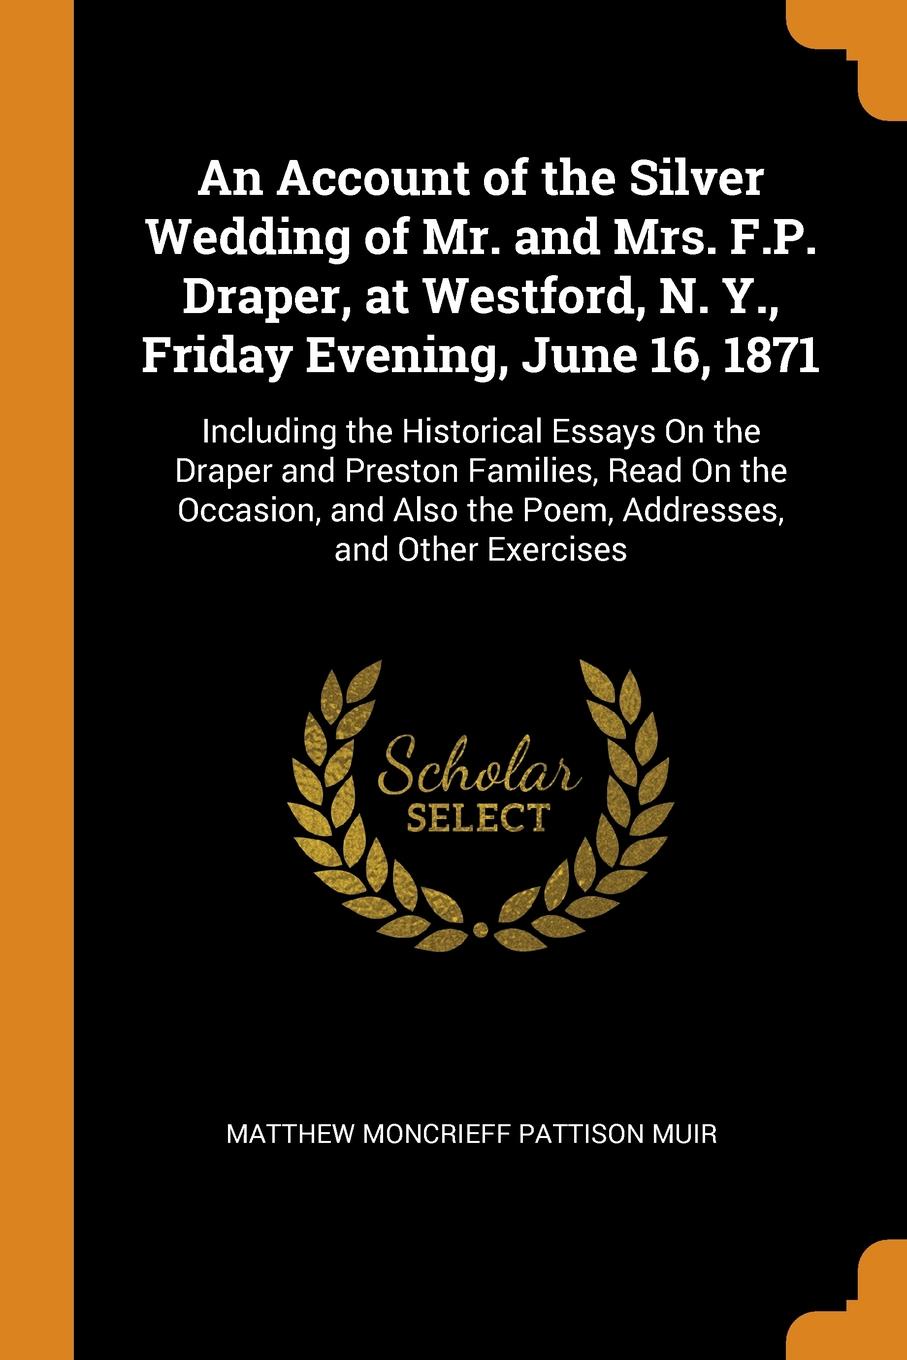 An Account of the Silver Wedding of Mr. and Mrs. F.P. Draper, at Westford, N. Y., Friday Evening, June 16, 1871. Including the Historical Essays On the Draper and Preston Families, Read On the Occasion, and Also the Poem, Addresses, and Other Exer...